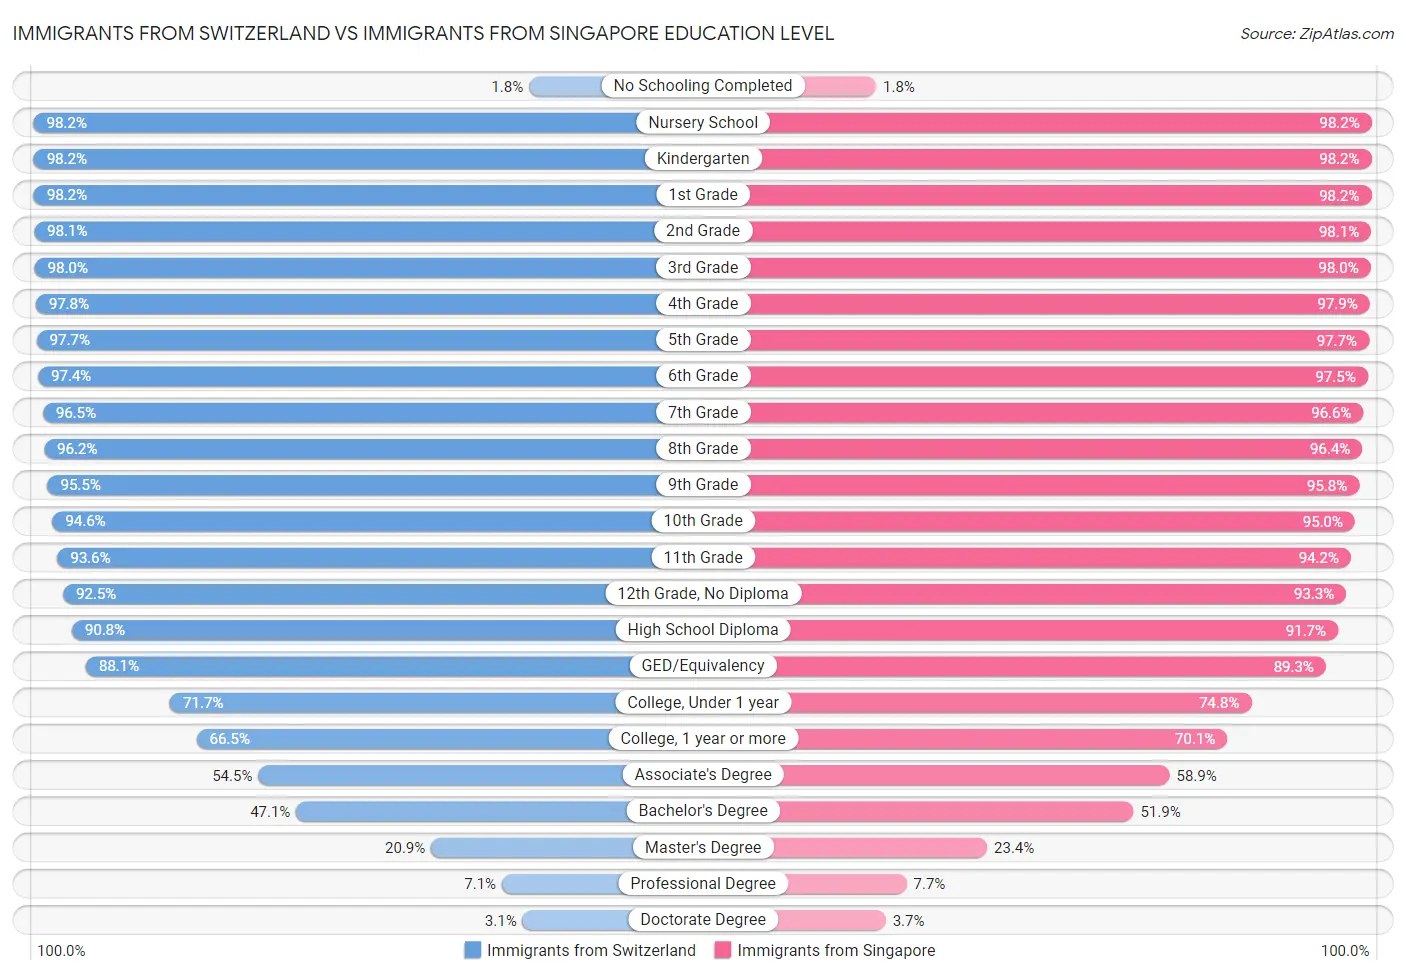 Immigrants from Switzerland vs Immigrants from Singapore Education Level